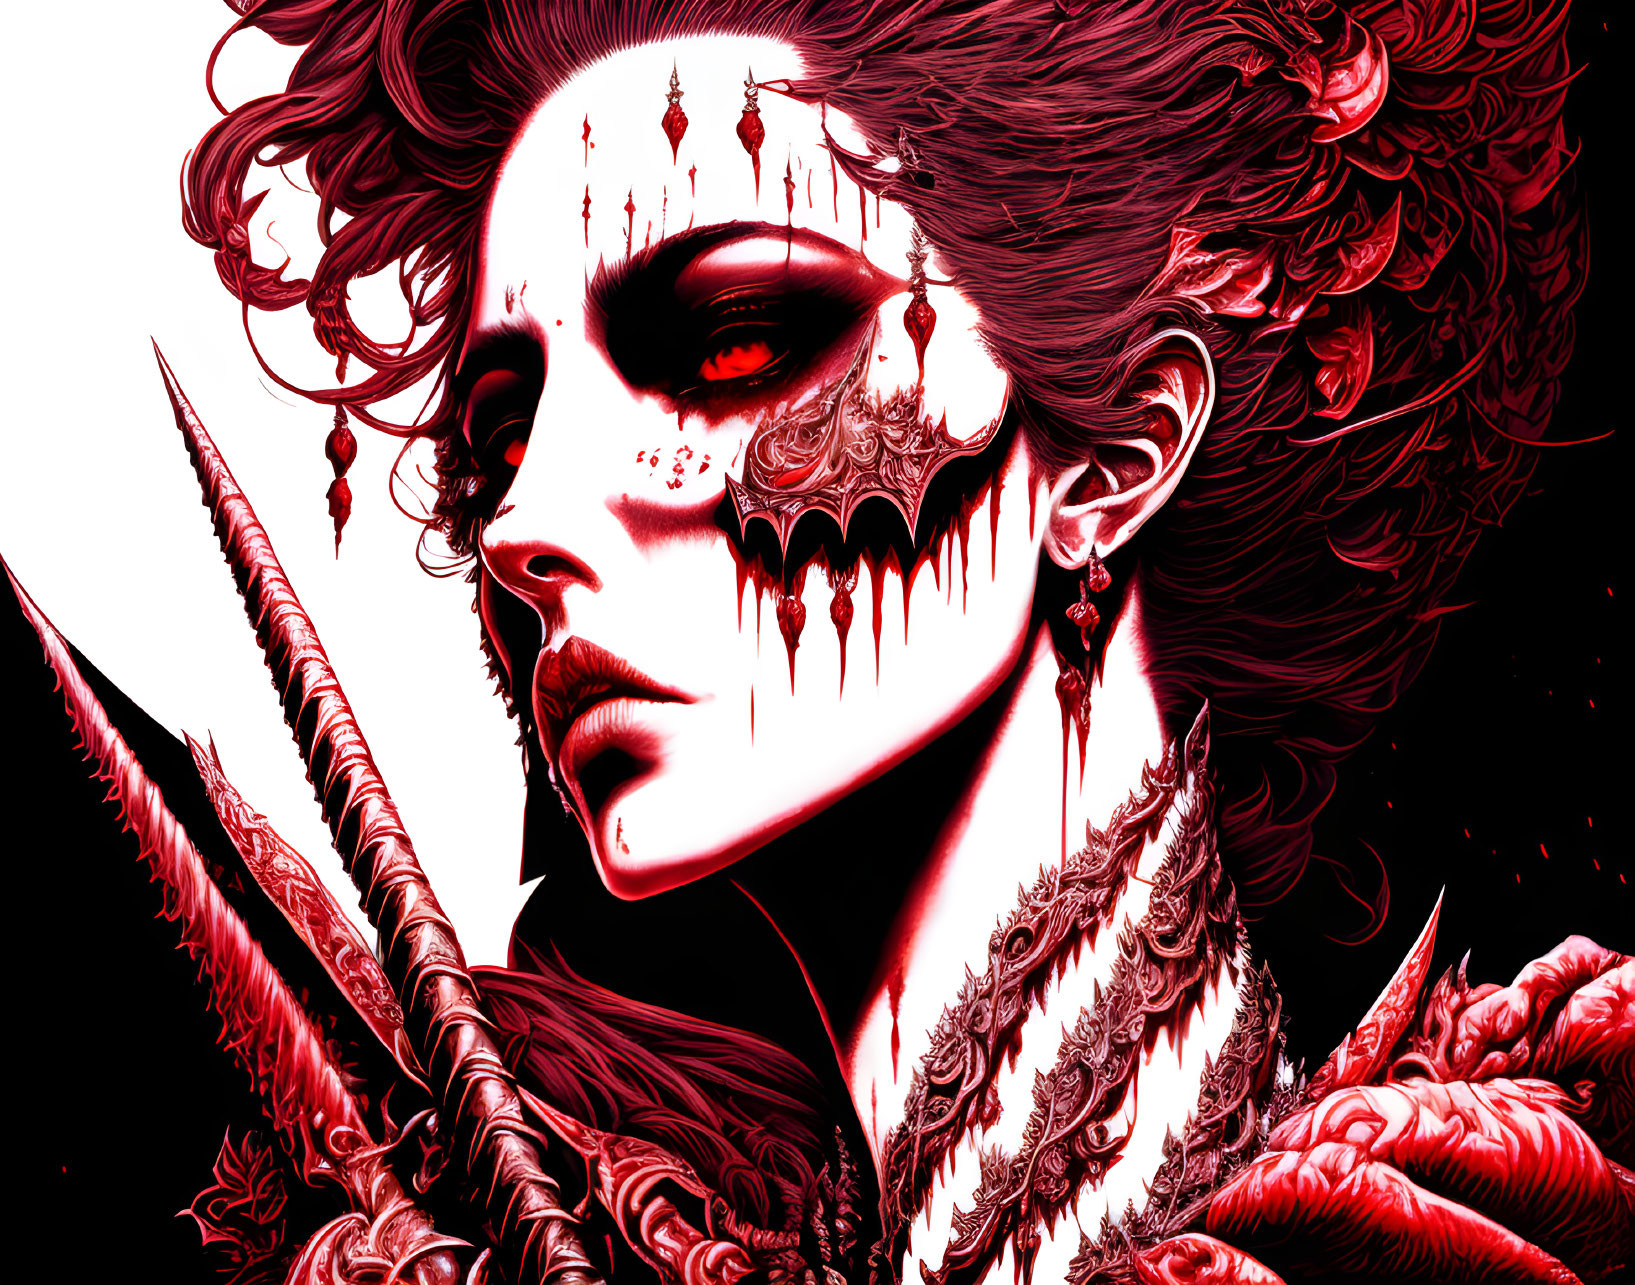 Detailed Illustration of Woman with Skeletal Half-Face and Intense Gaze in Red and Black